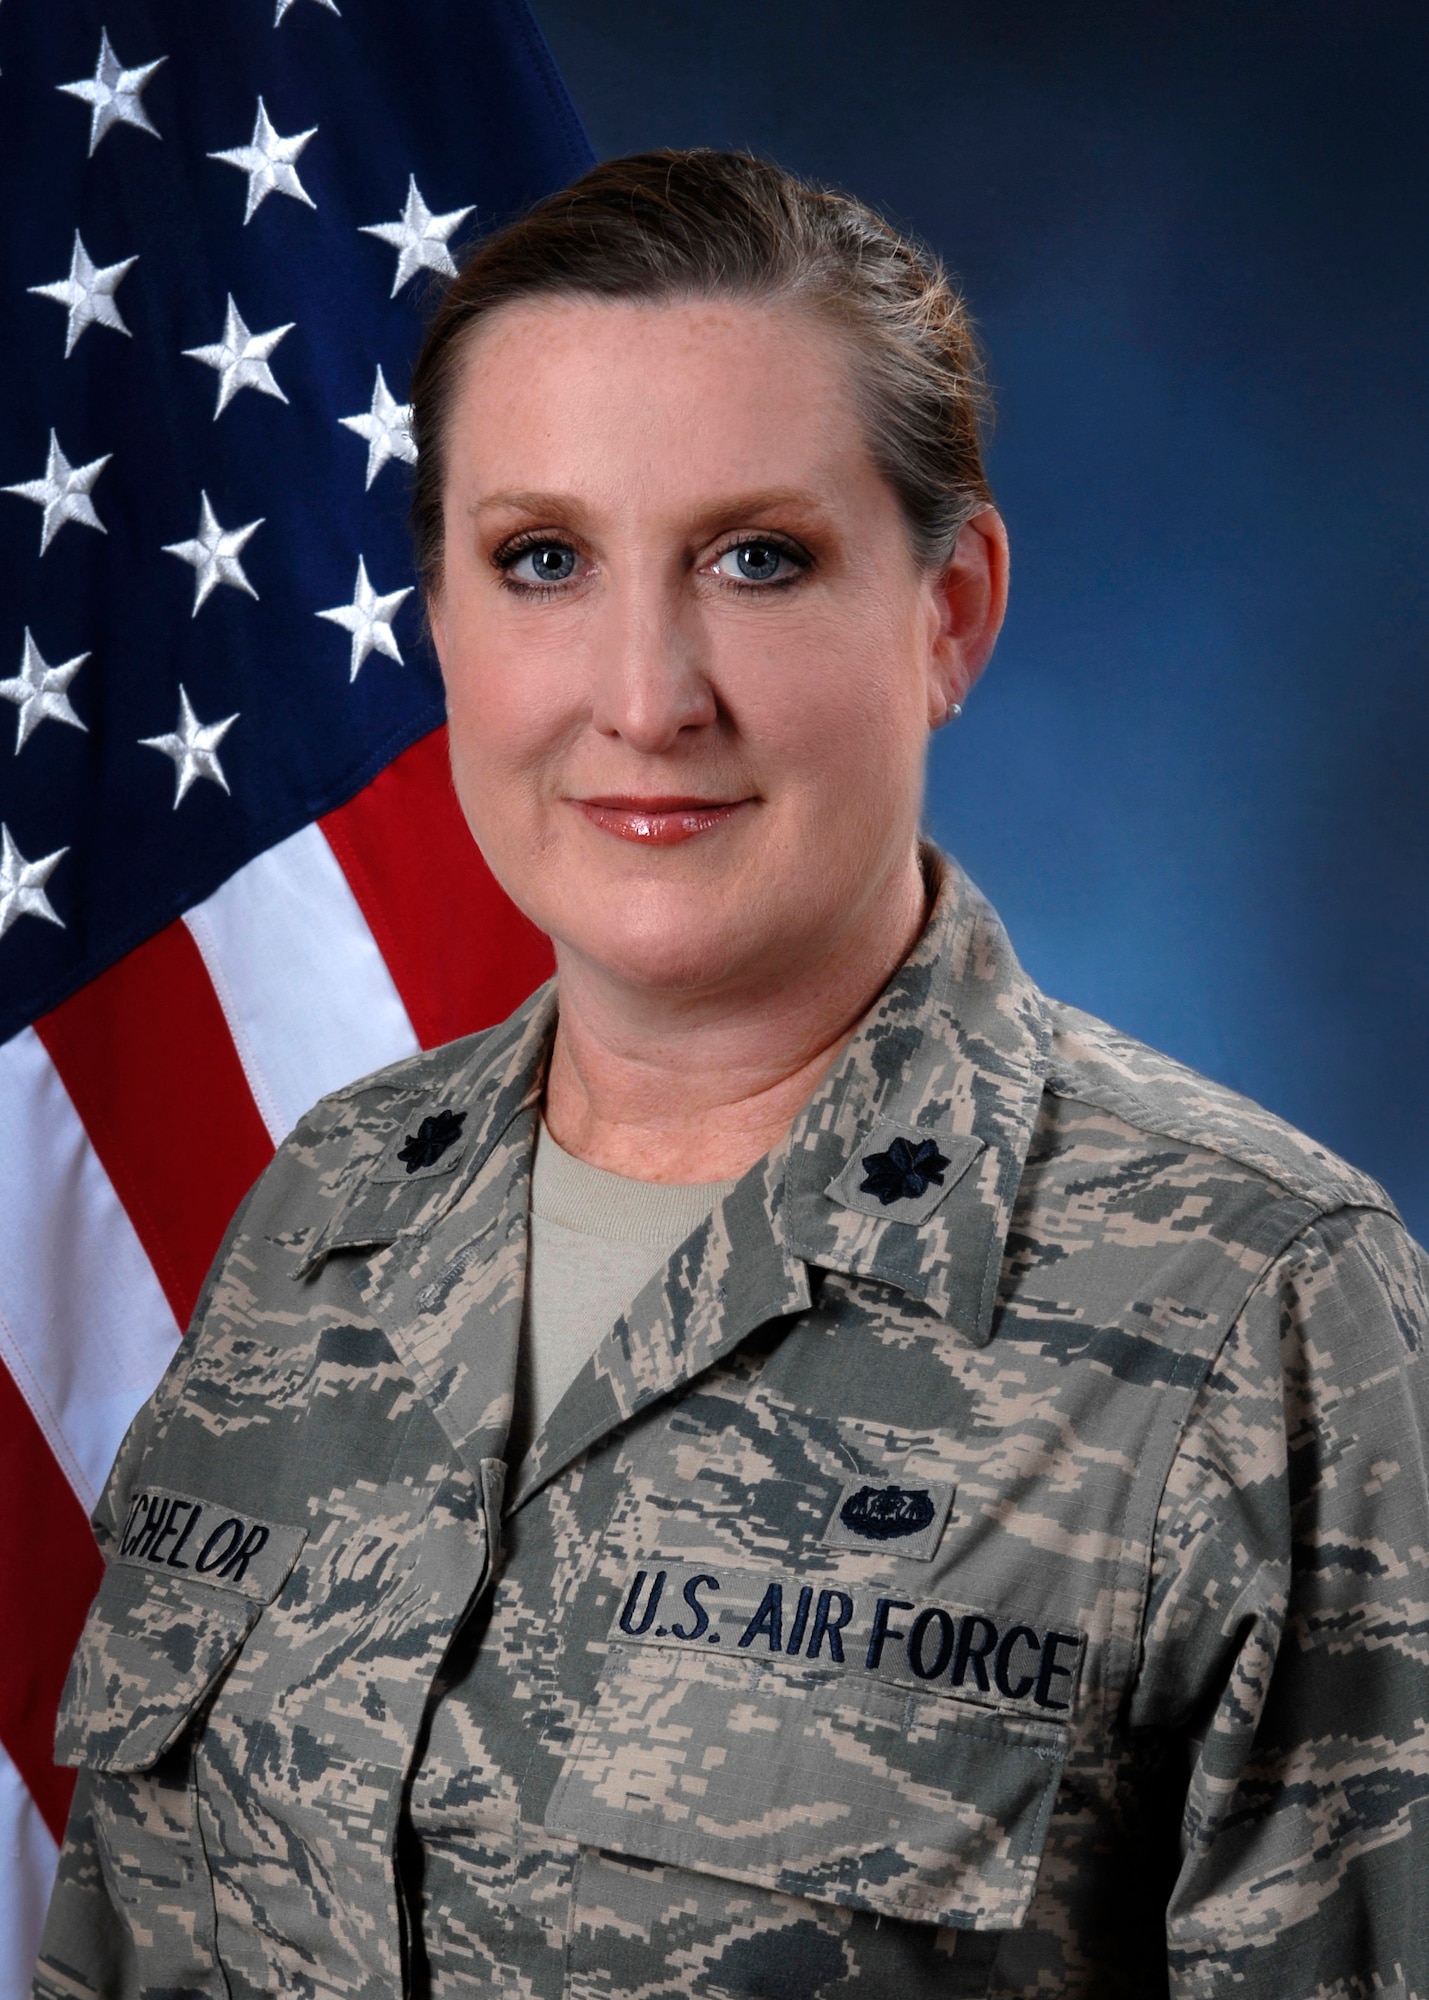 Lt. Col. Sonya Batchelor, staff judge advocate for the 149th Fighter Wing, Texas Air National Guard, at Joint Base San Antonio - Lackland, Texas, Dec. 30, 2012. (Air National Guard photo by Senior Master Sgt. Miguel Arellano / Released)